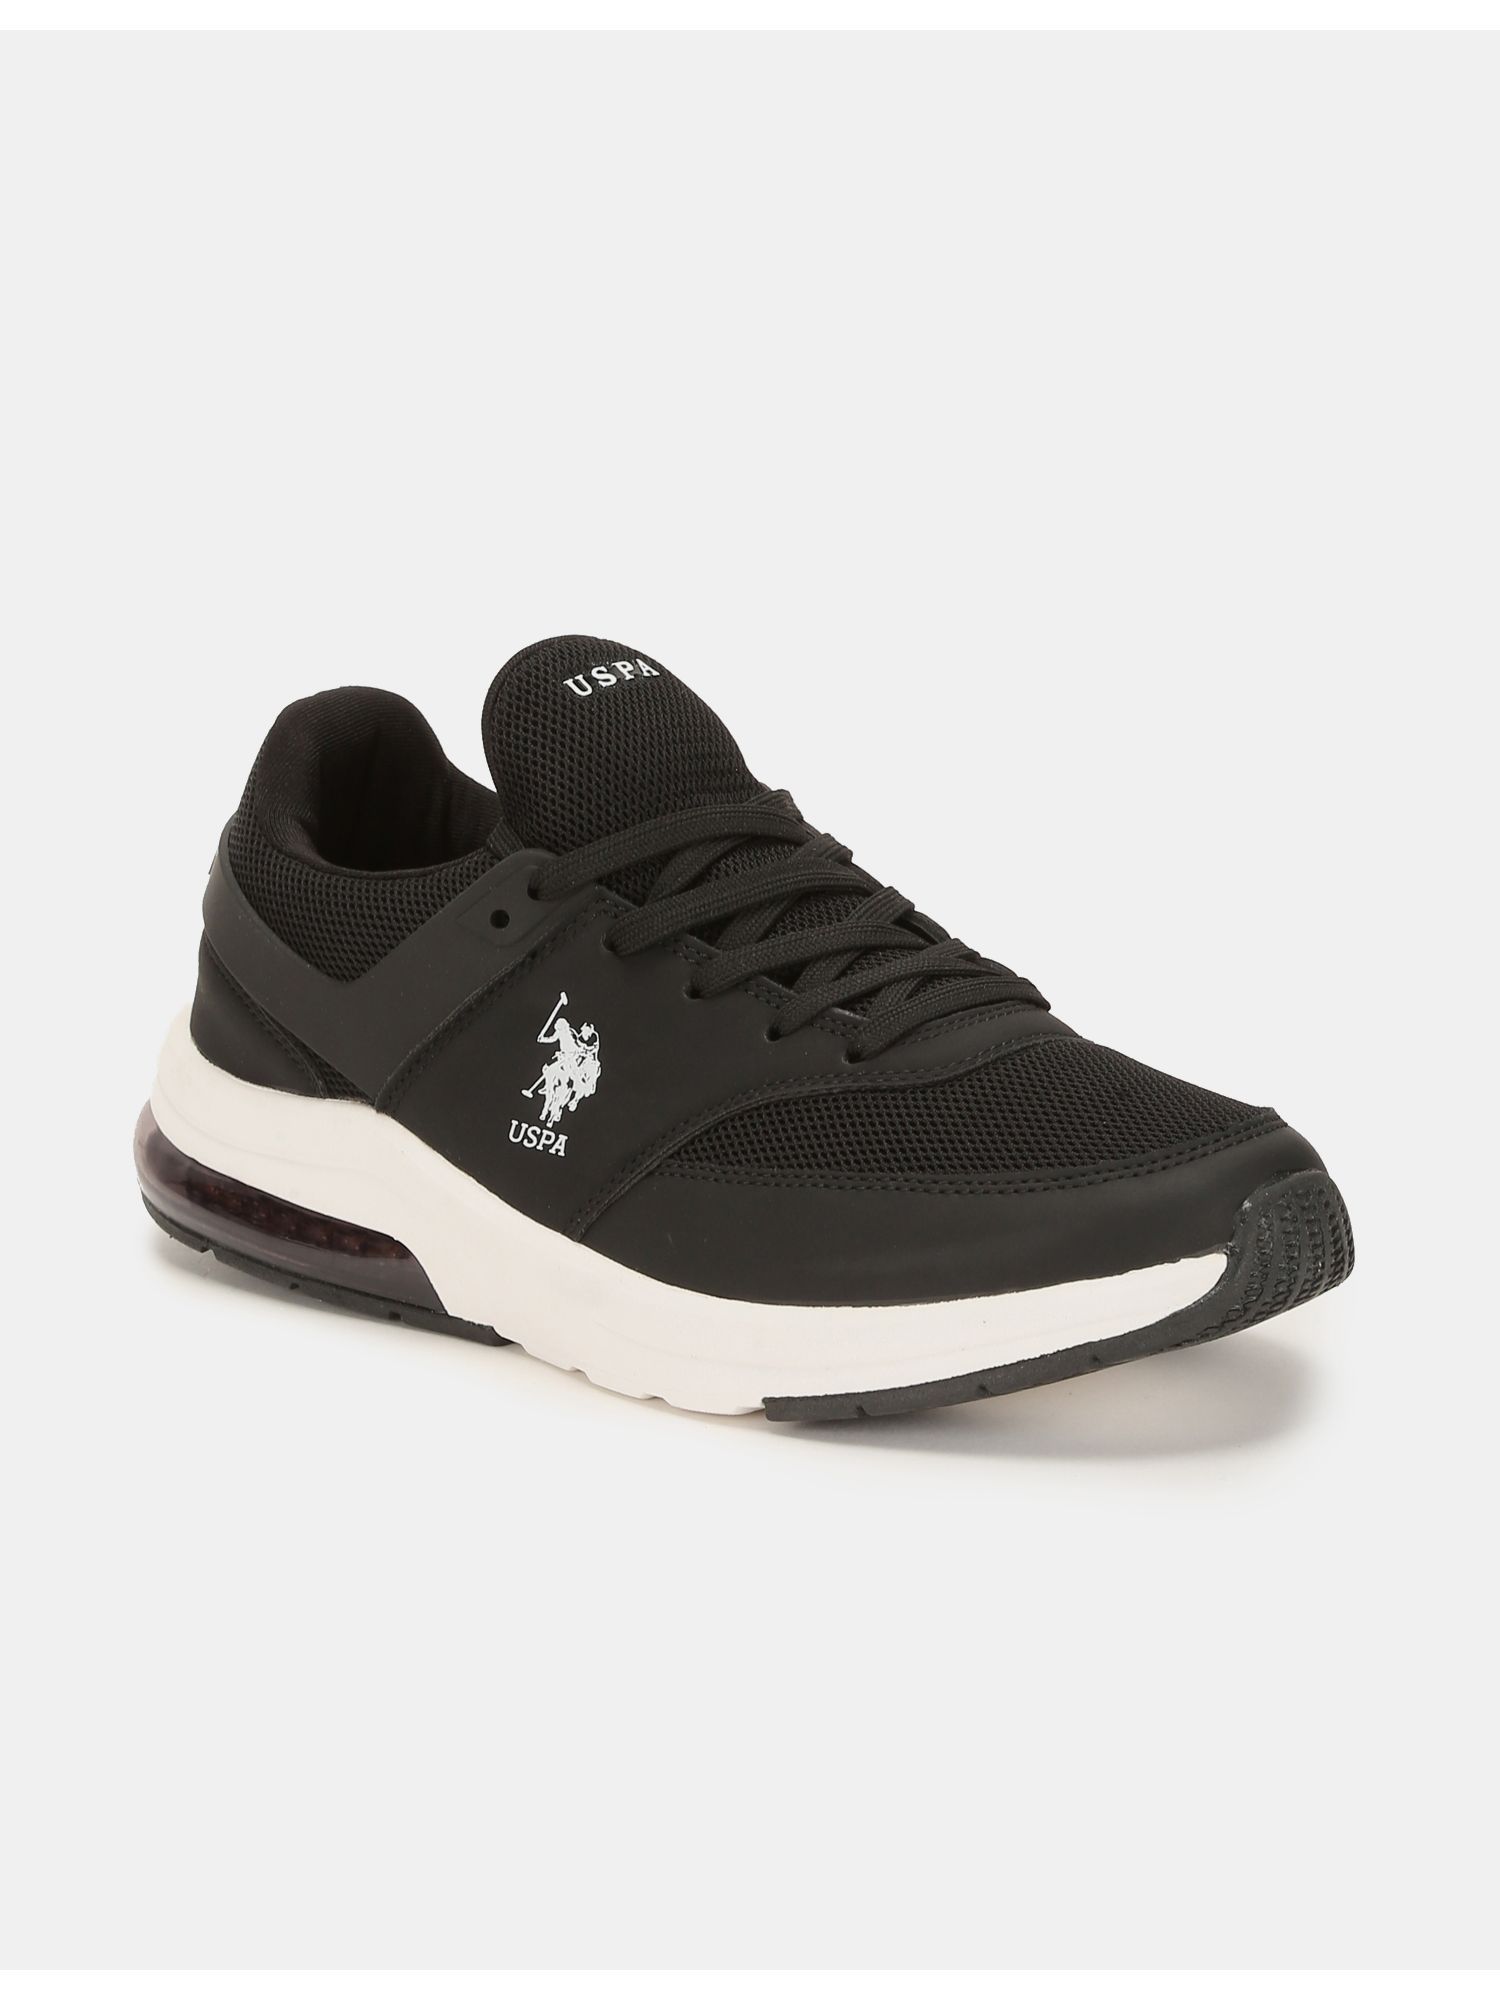 U.s. Polo Assn. Solid Sneakers - 11